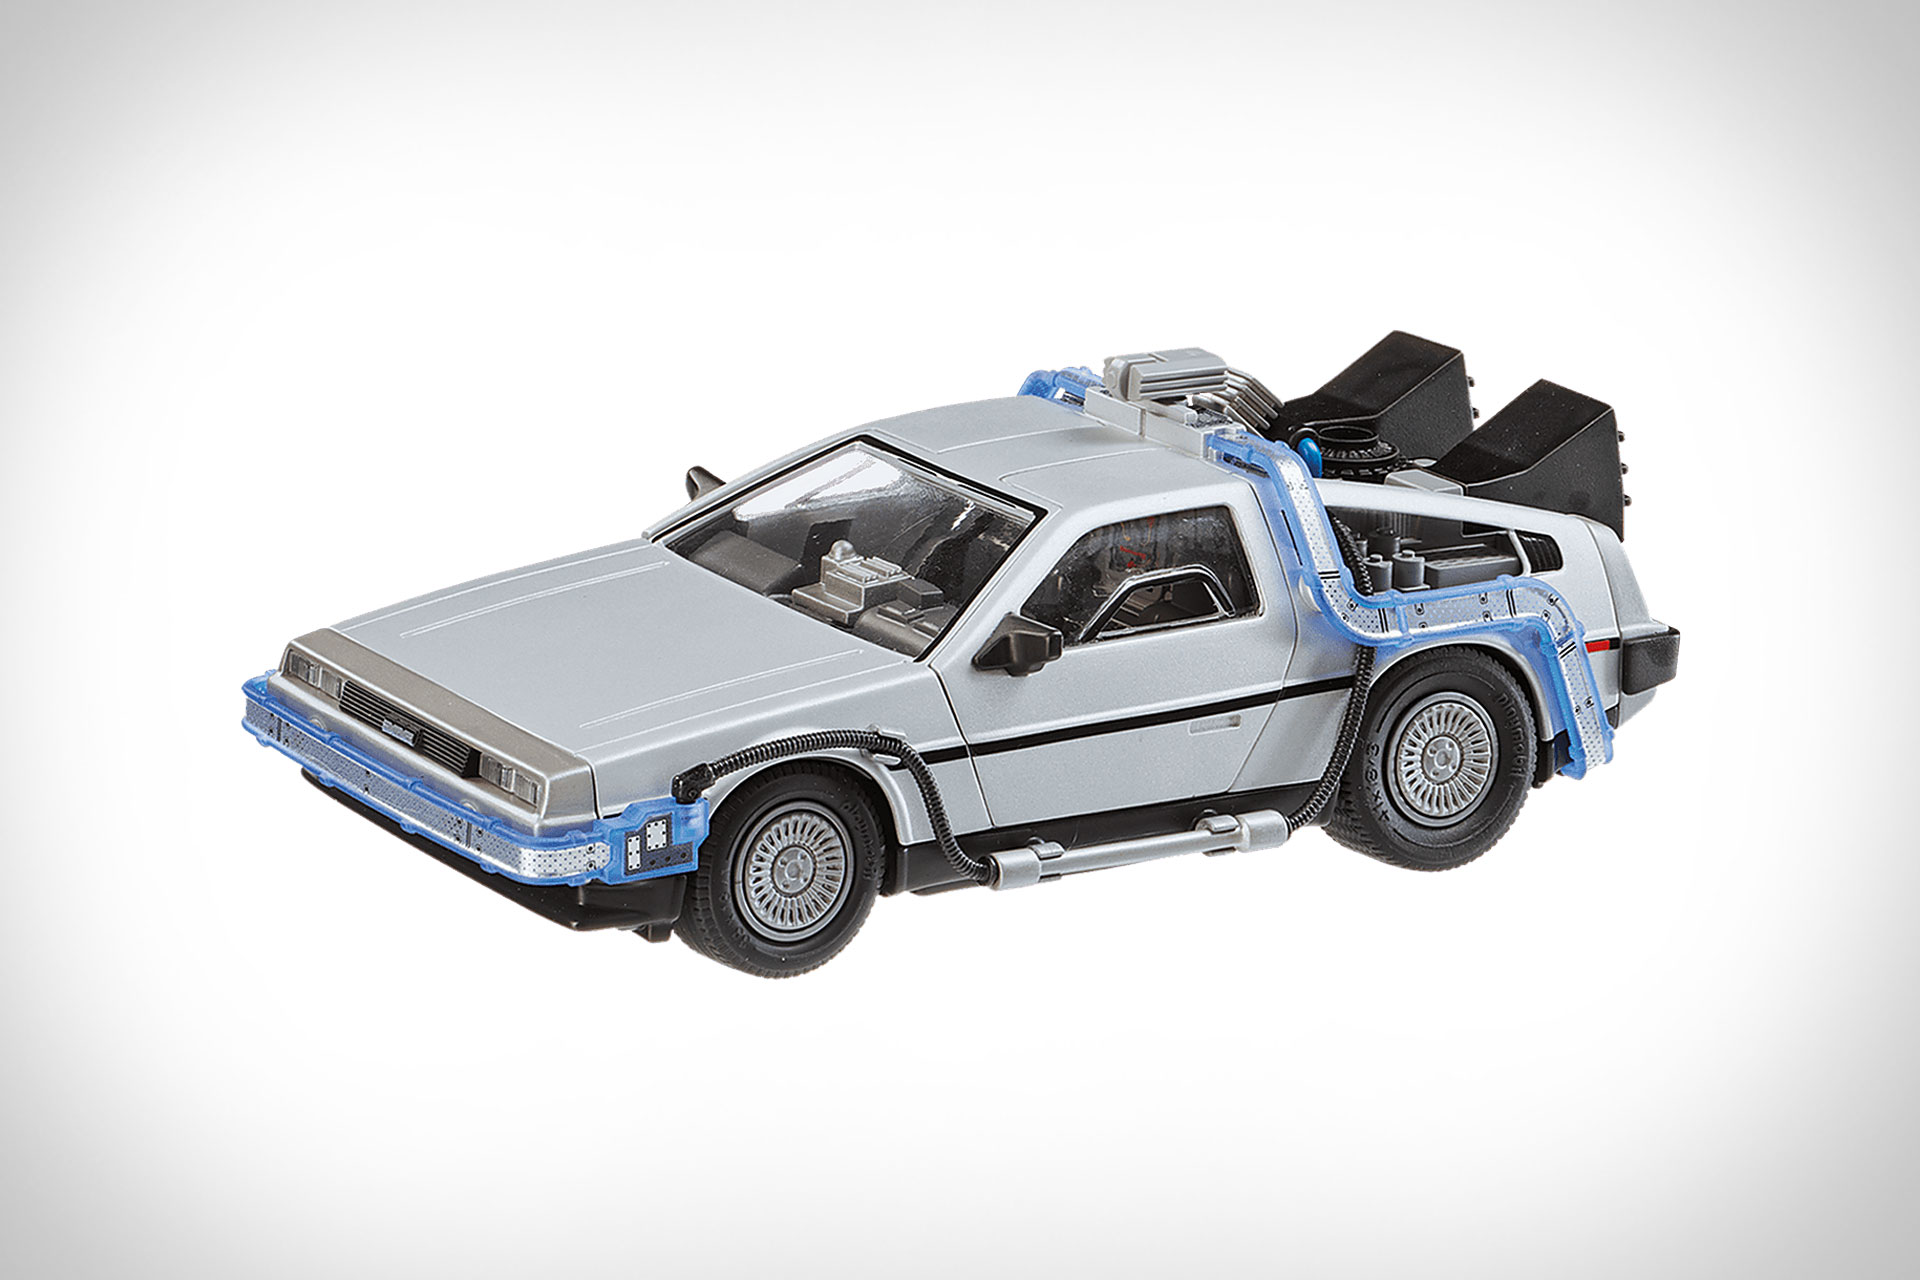 Playmobil Back to the Future DeLorean Toy